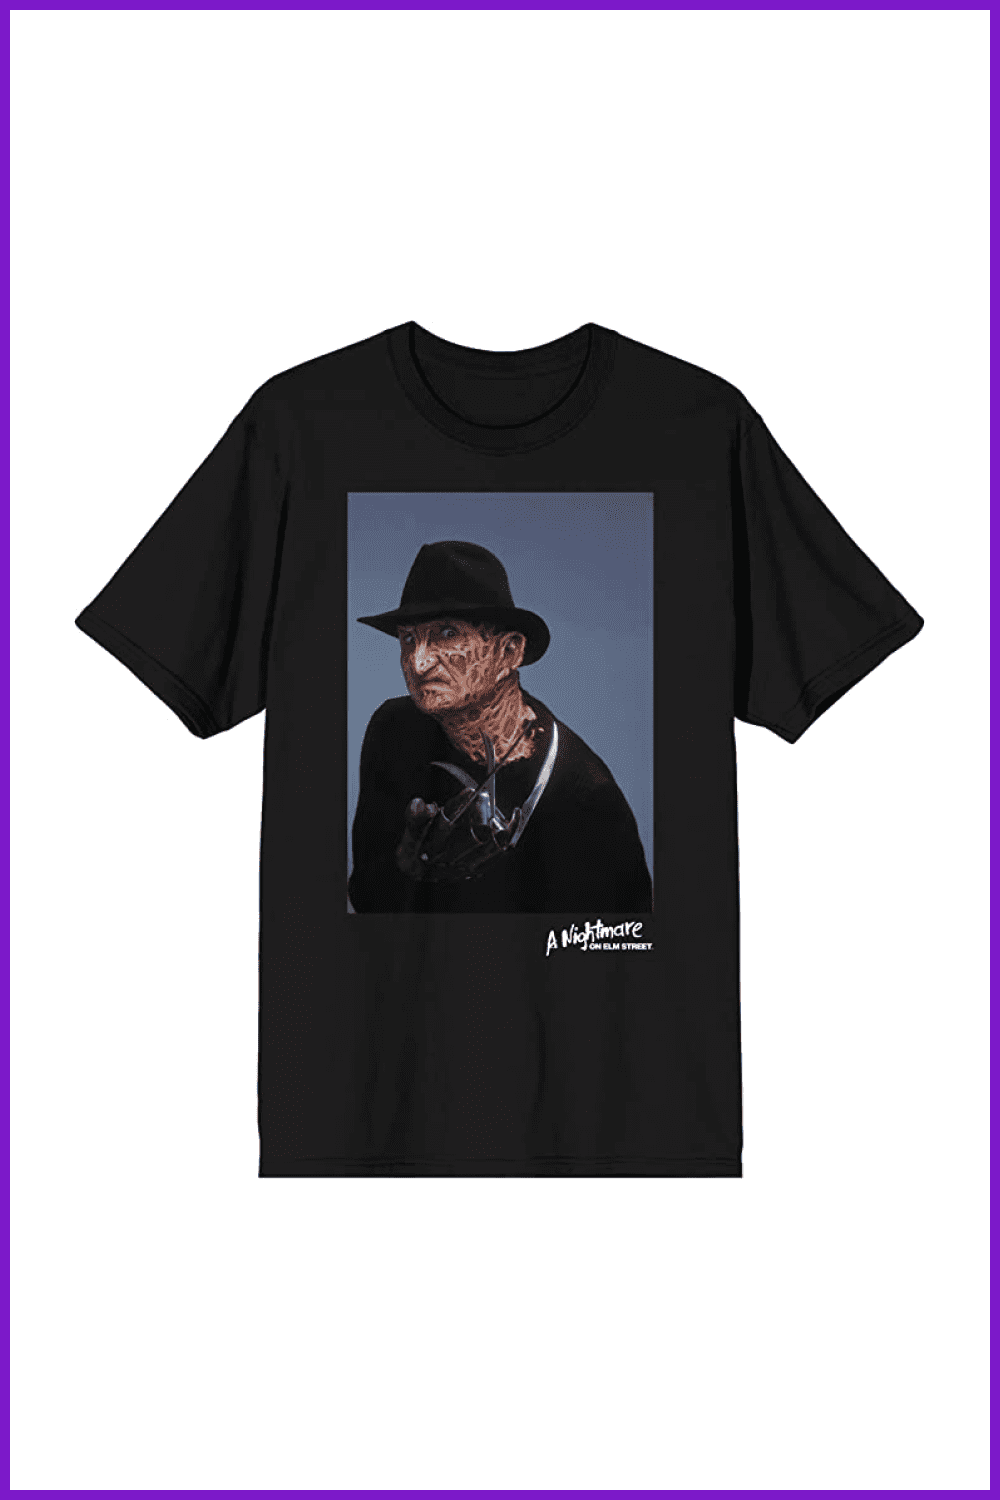 Black T-shirt with a photo of Freddy Krueger.